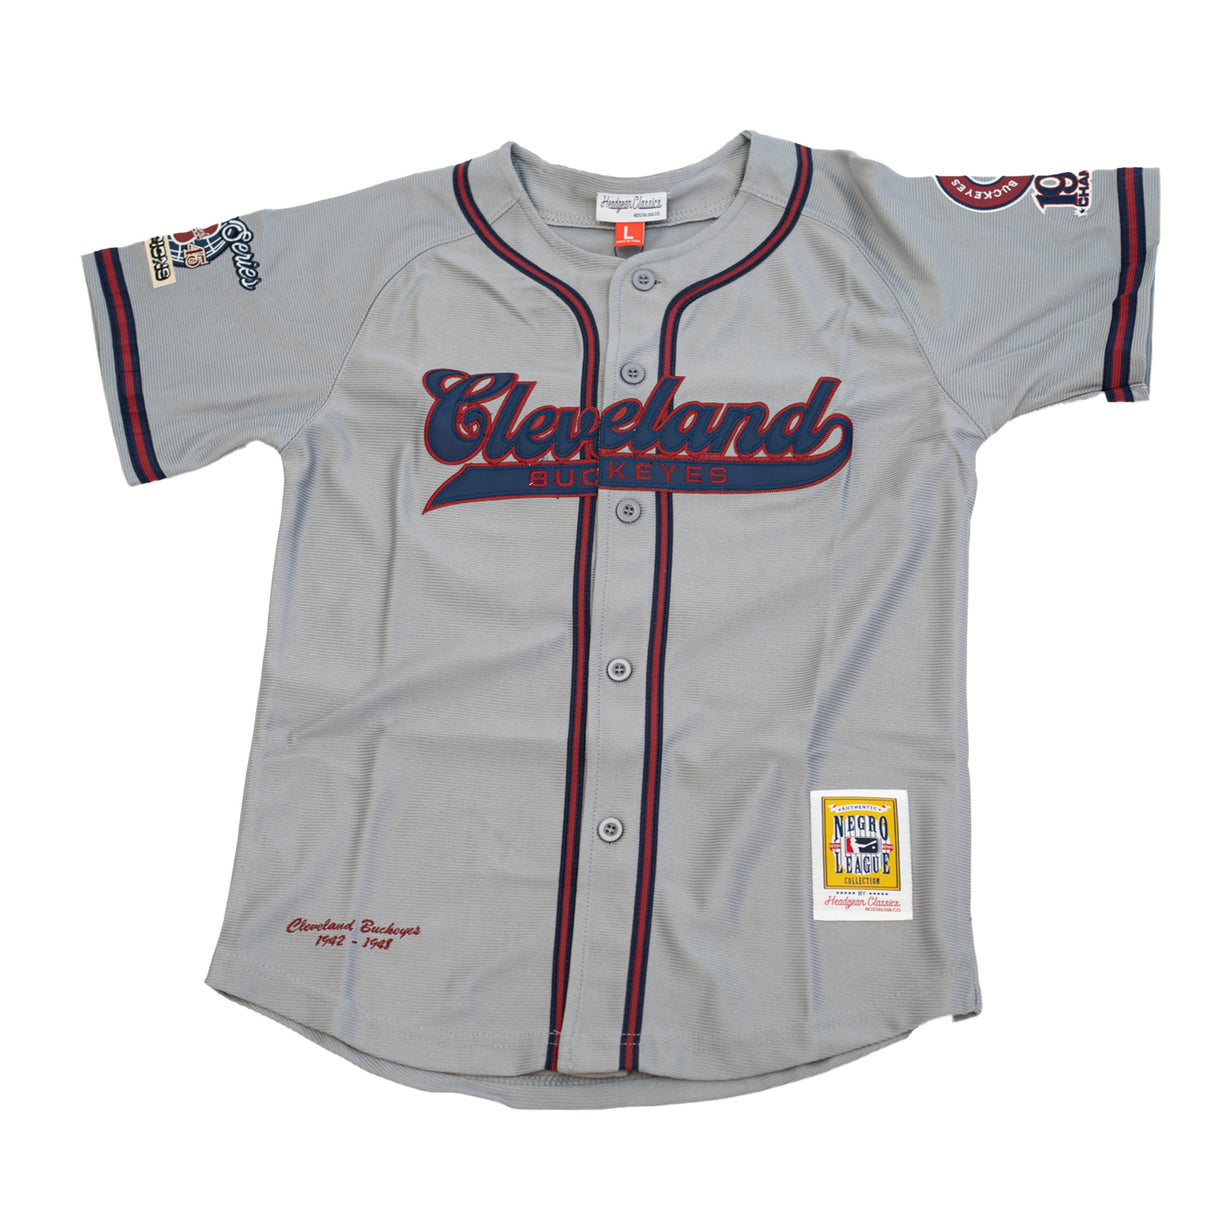 YOUTH CLEVELAND BUCKEYES BUTTON DOWN BASEBALL JERSEY